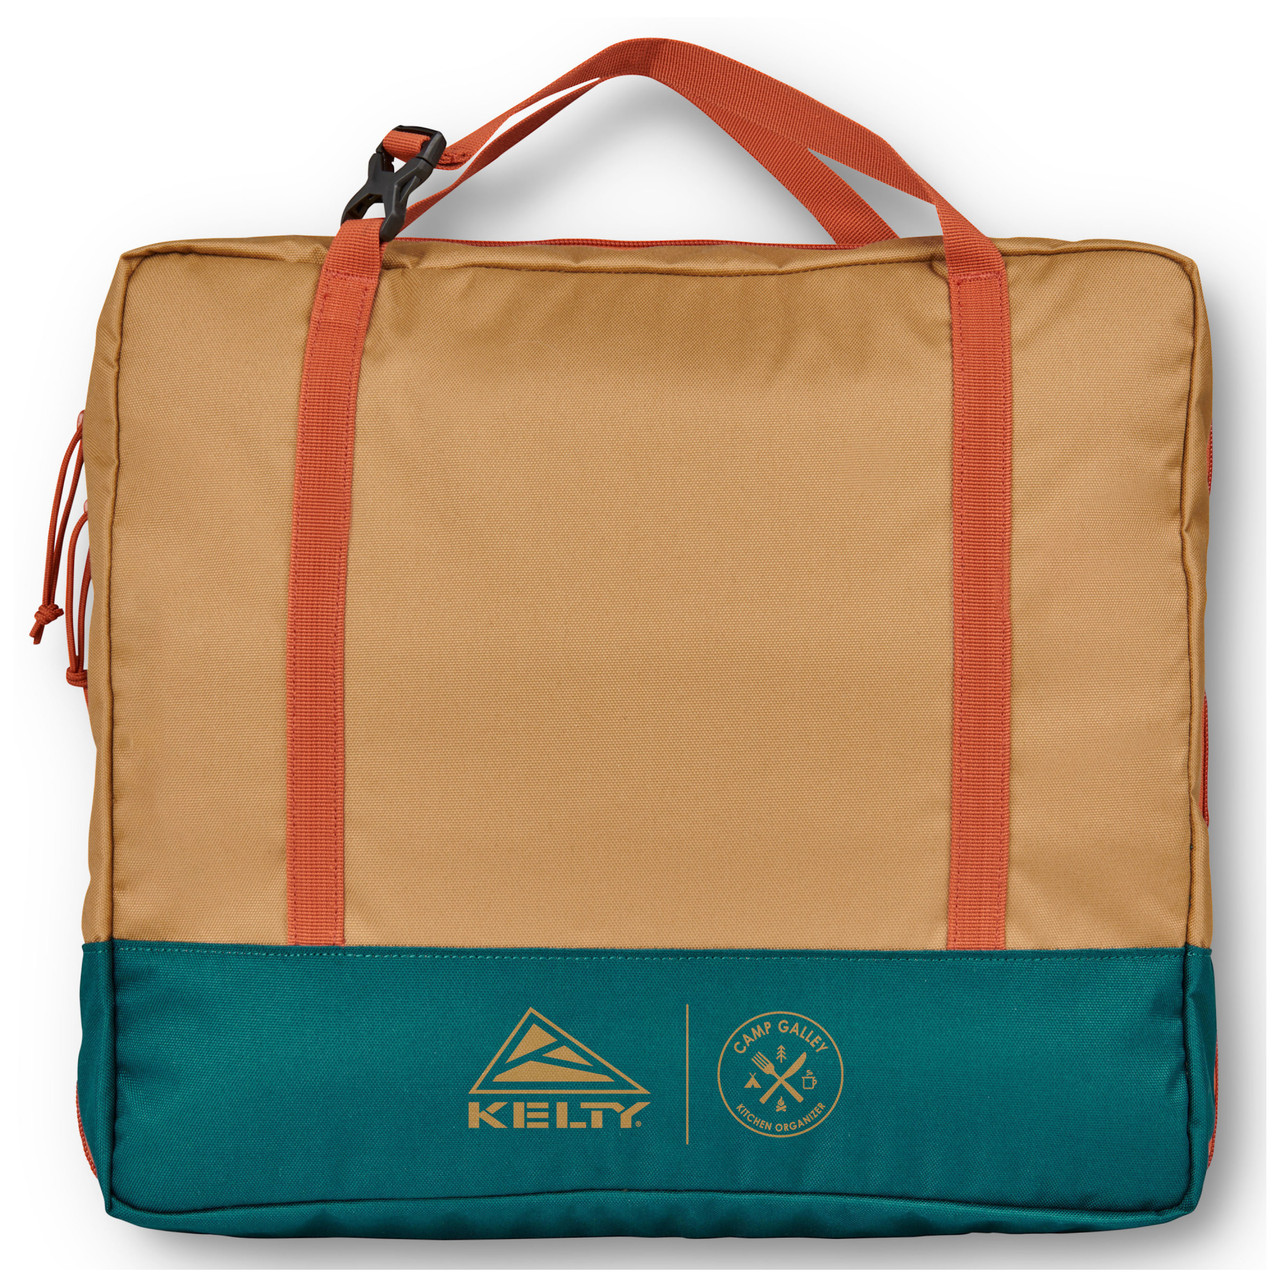 Kelty Camp Kitchen Reviews - Trailspace